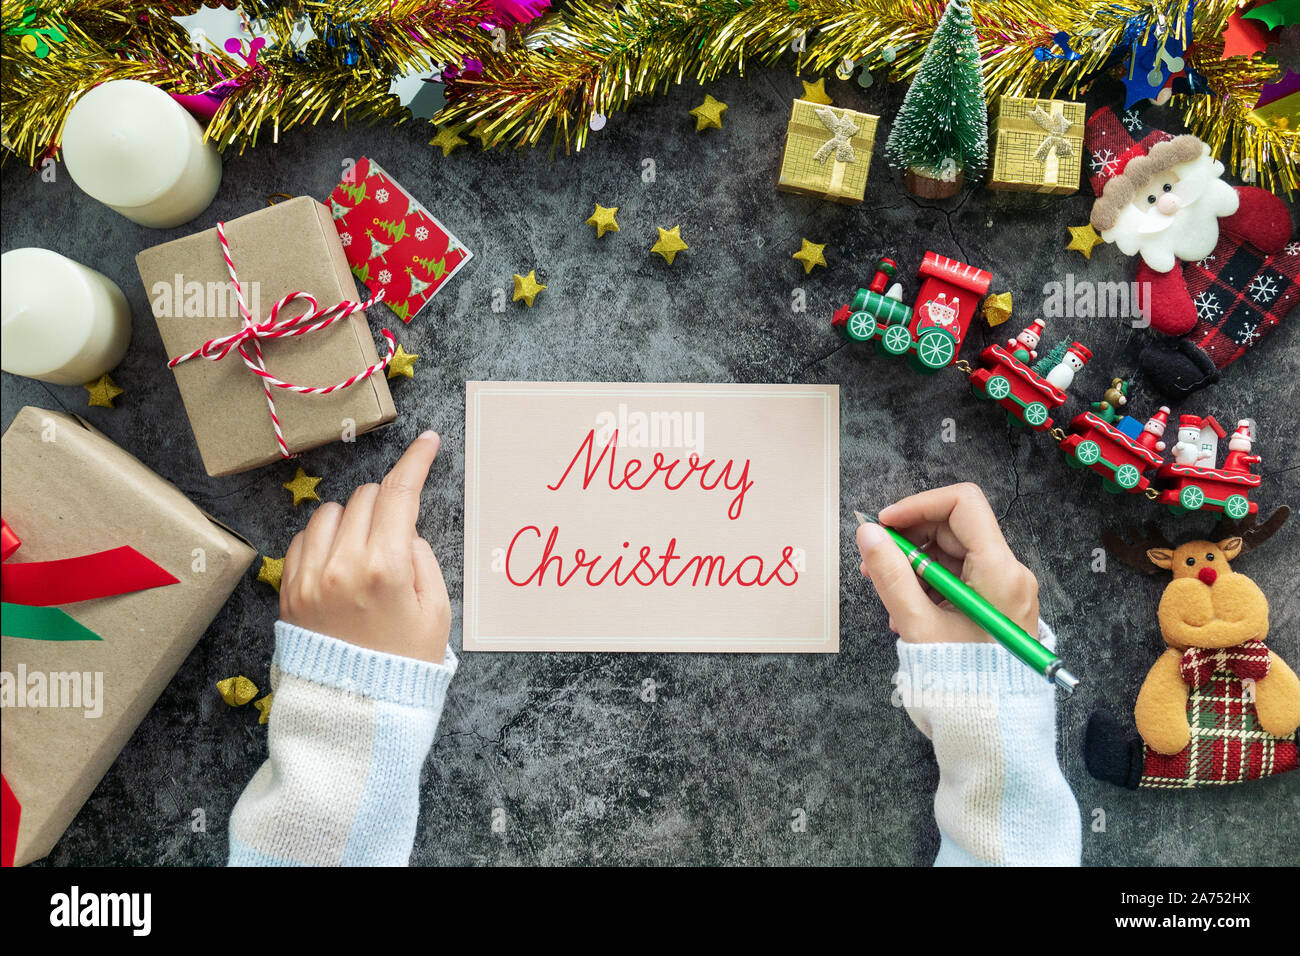 hand writing Merry Christmas on greeting card during Christmas season and gift festival, decorations with Christmas ornament on table Stock Photo